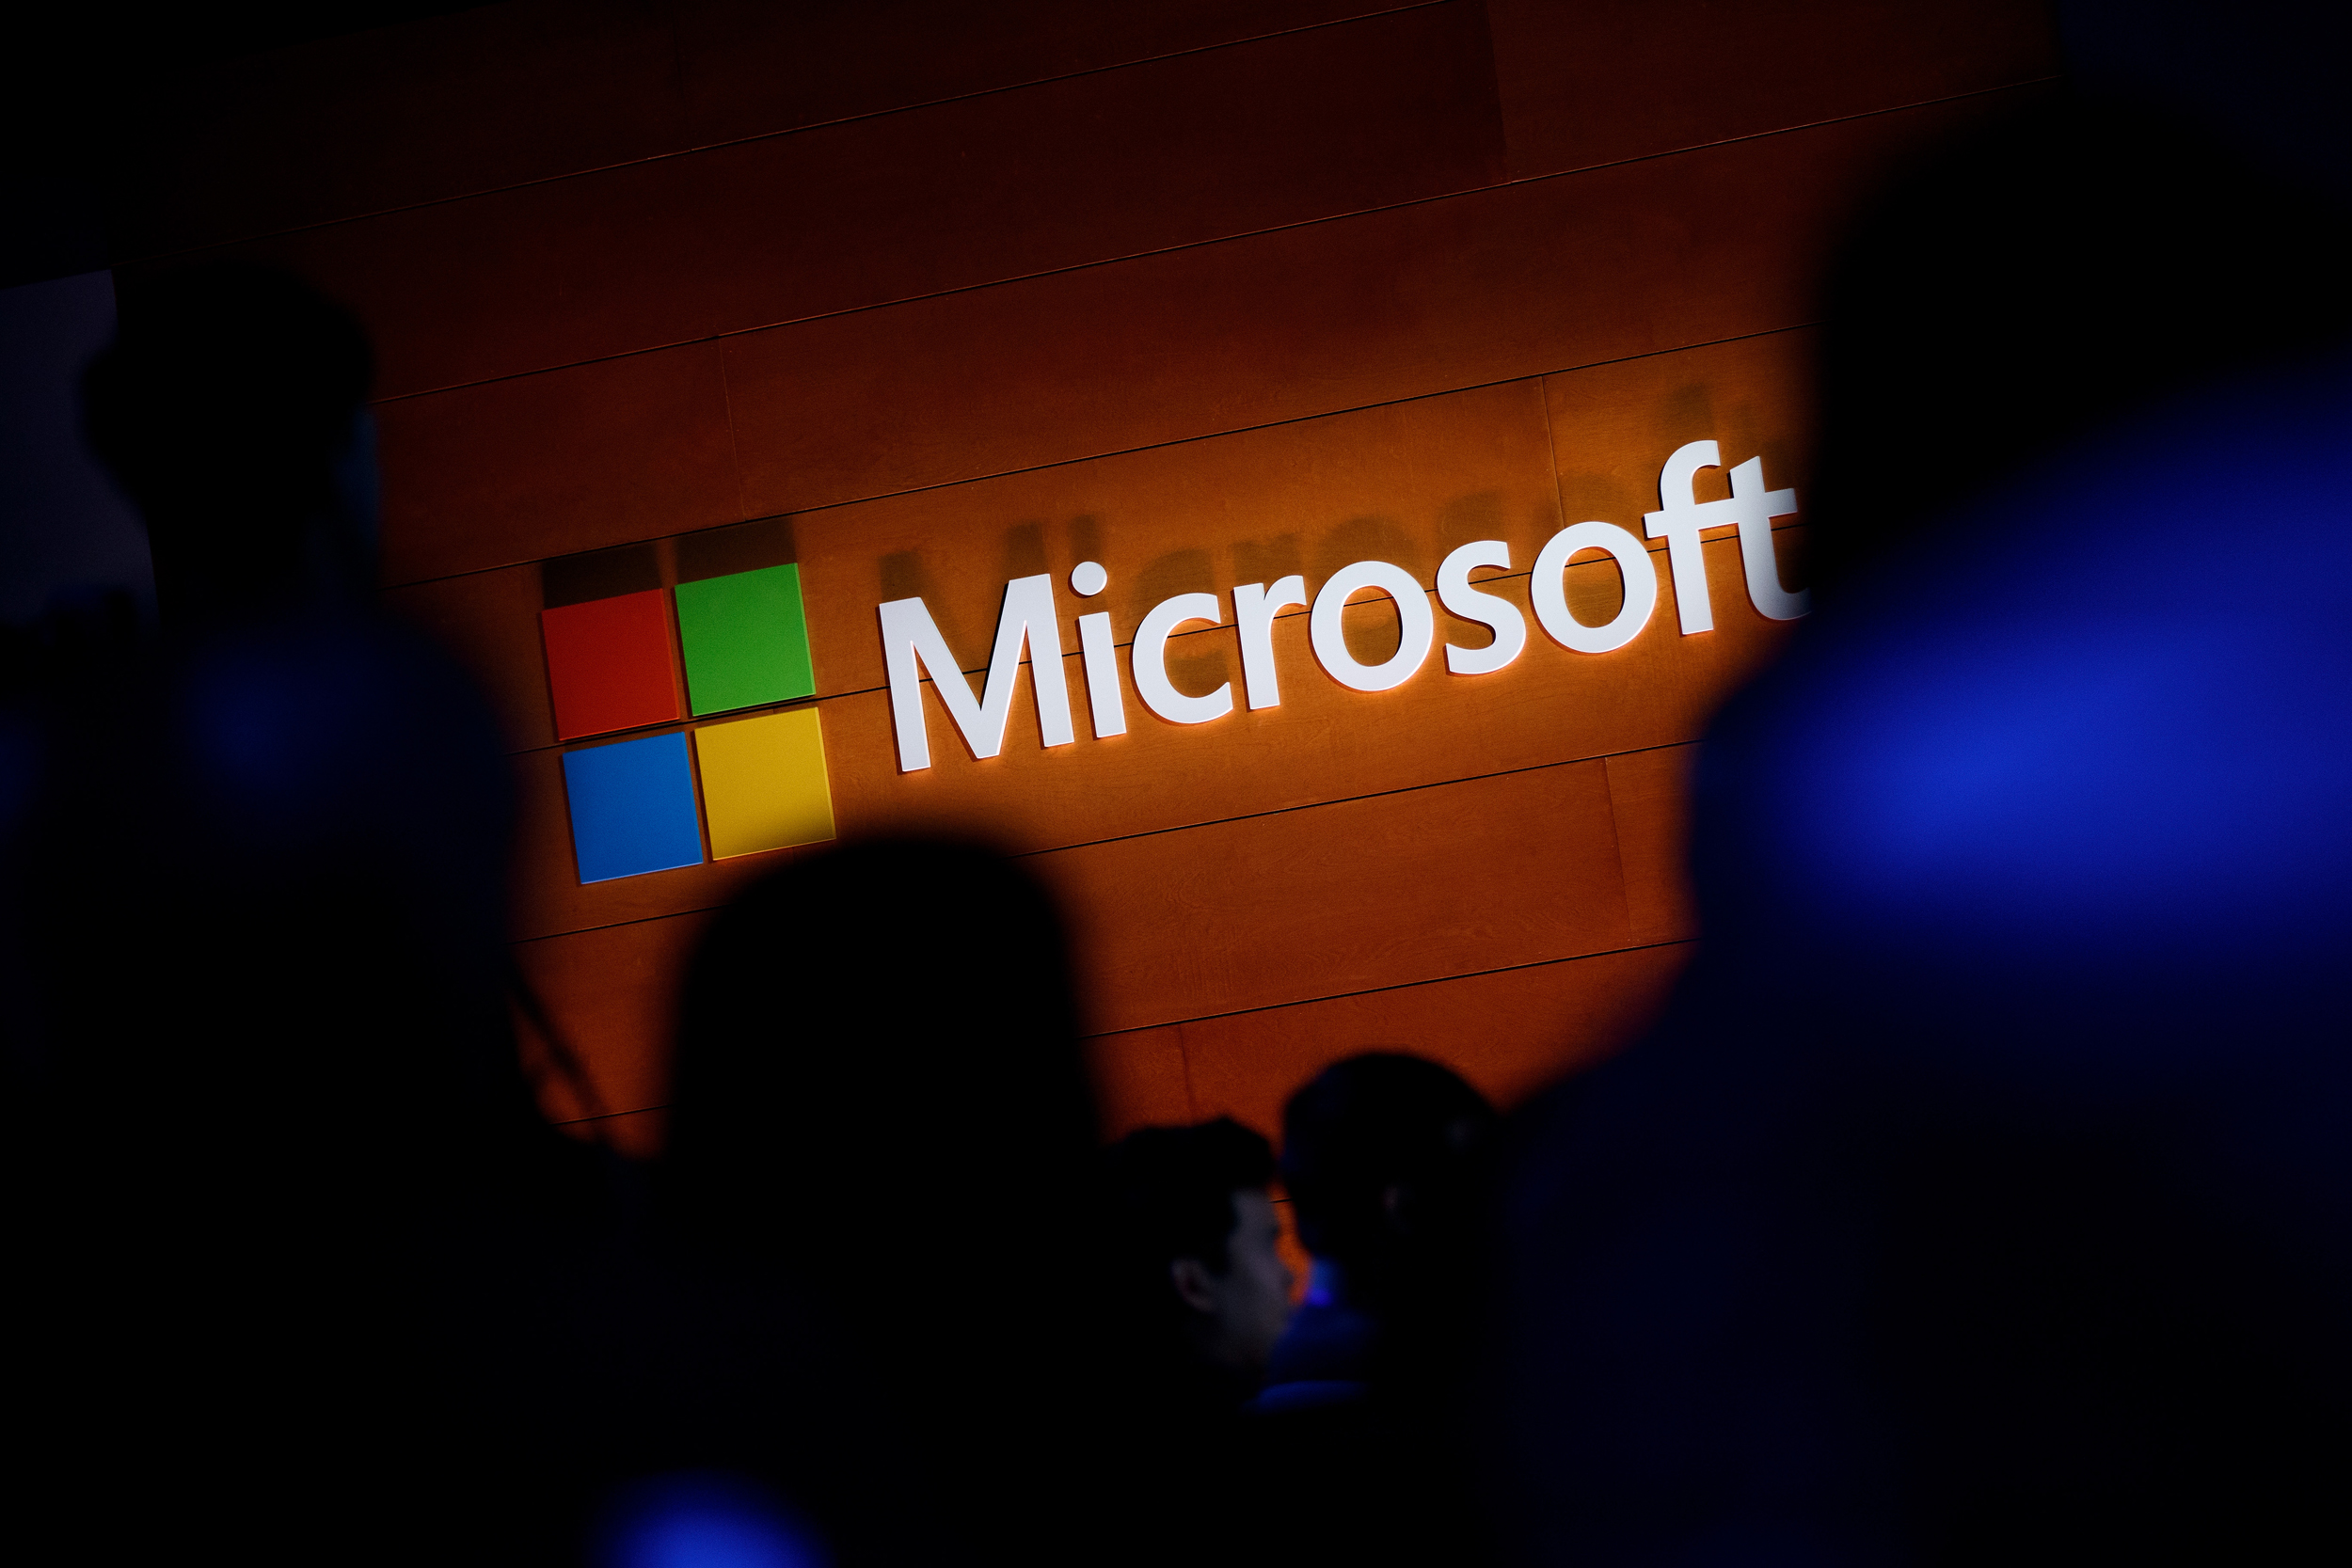 Microsoft’s Cybersecurity Talent is Now Up For Hire